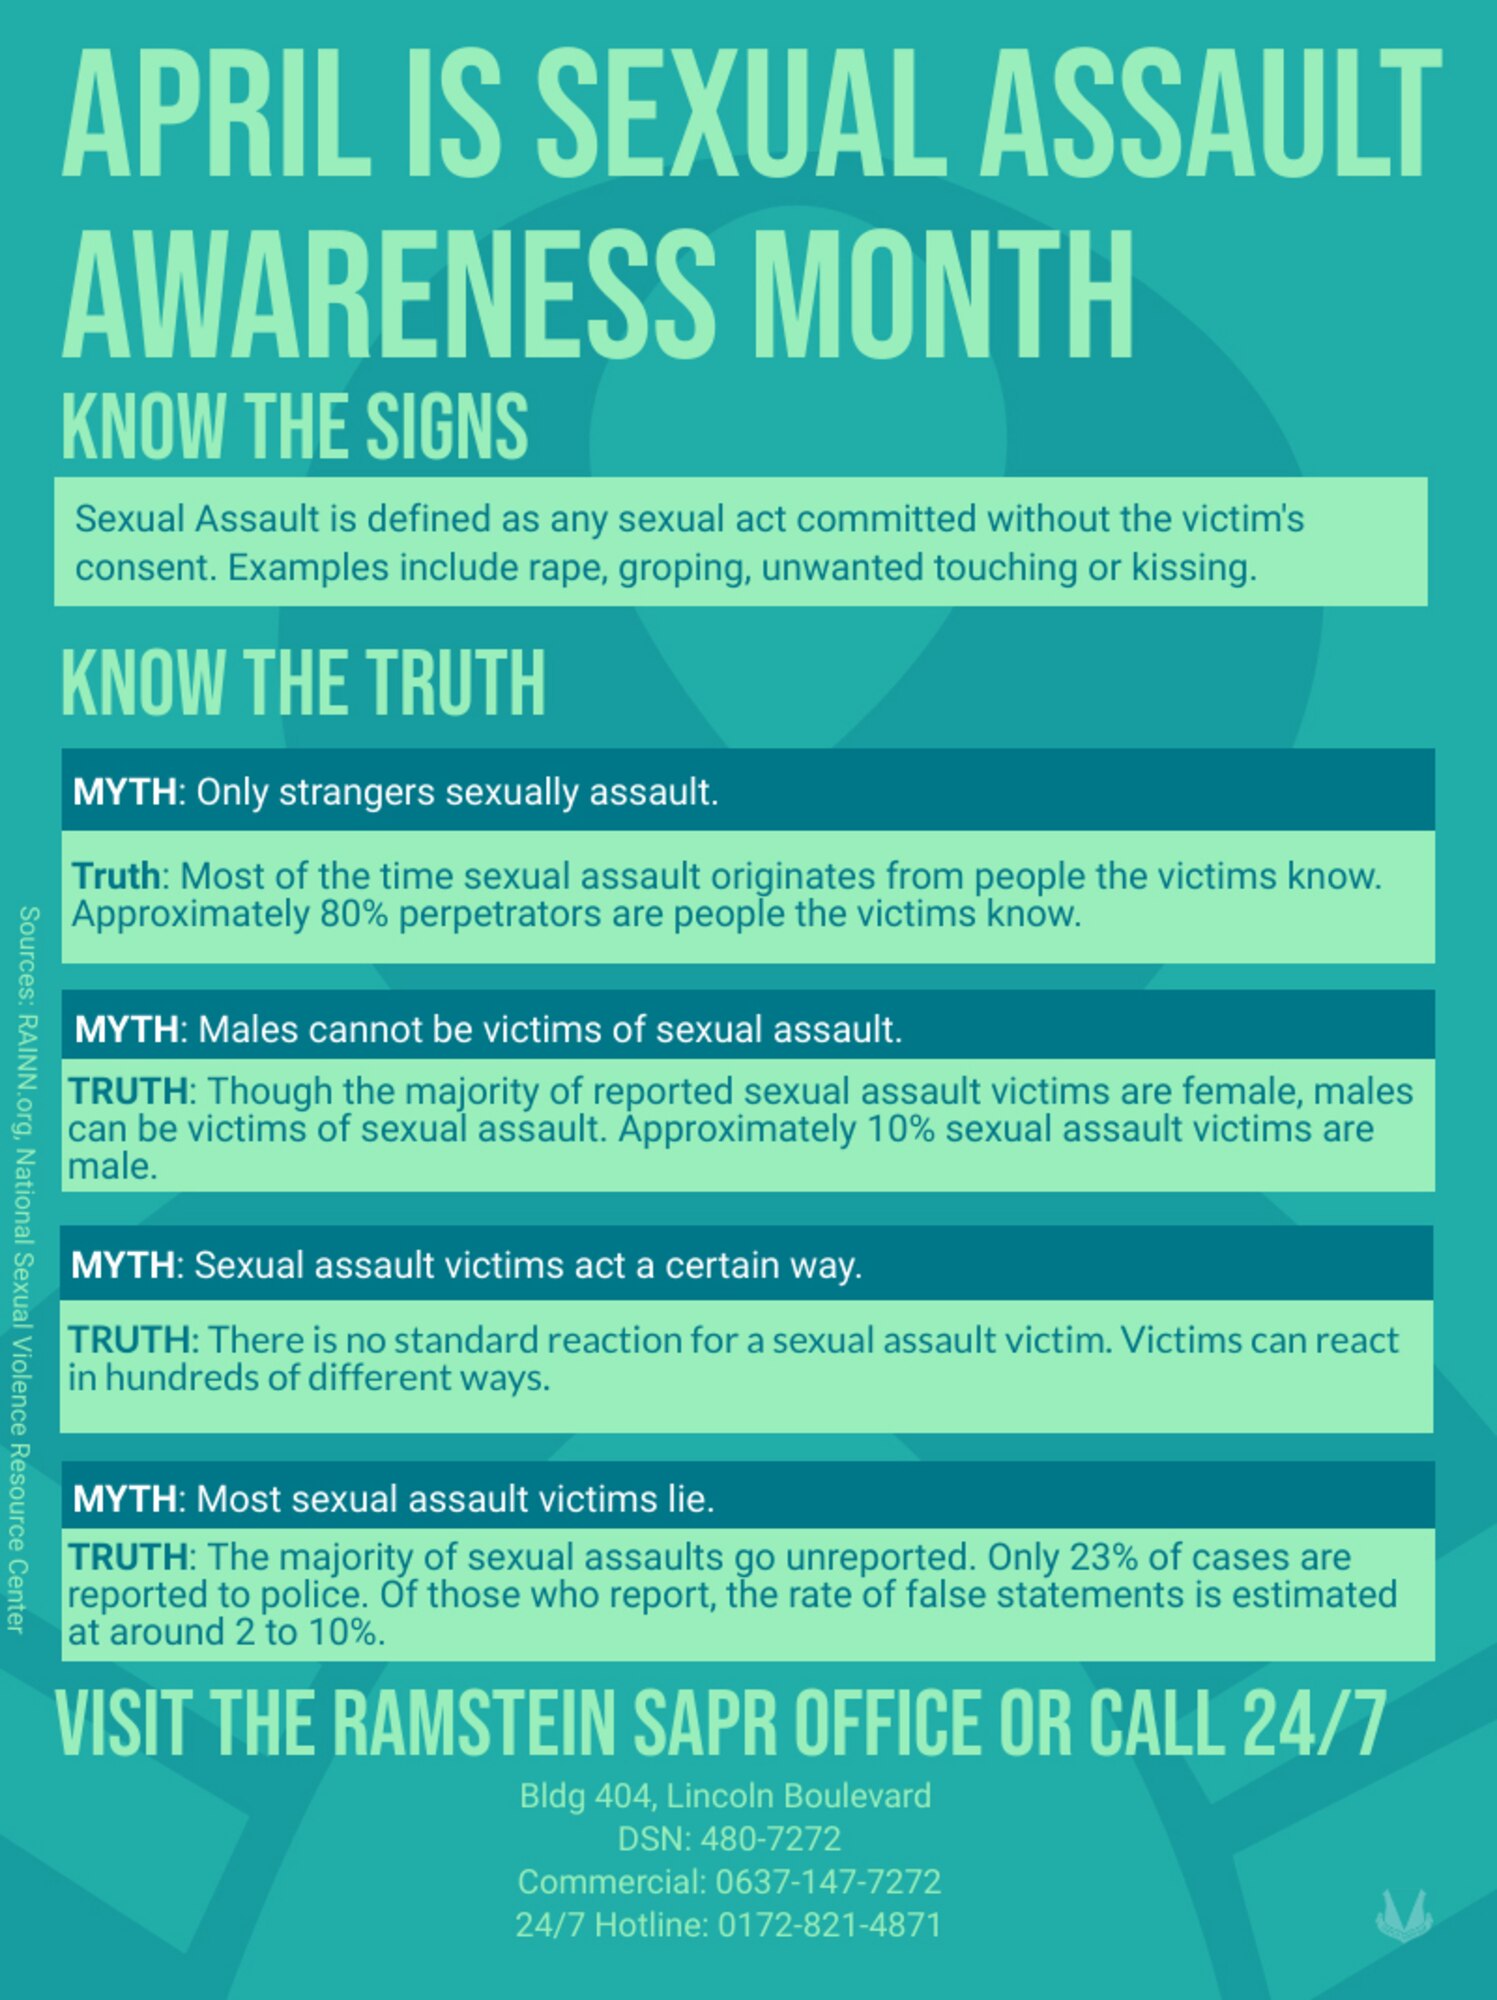 A graphic displaying infamous myths surrounding sexual assault and their corresponding truths.